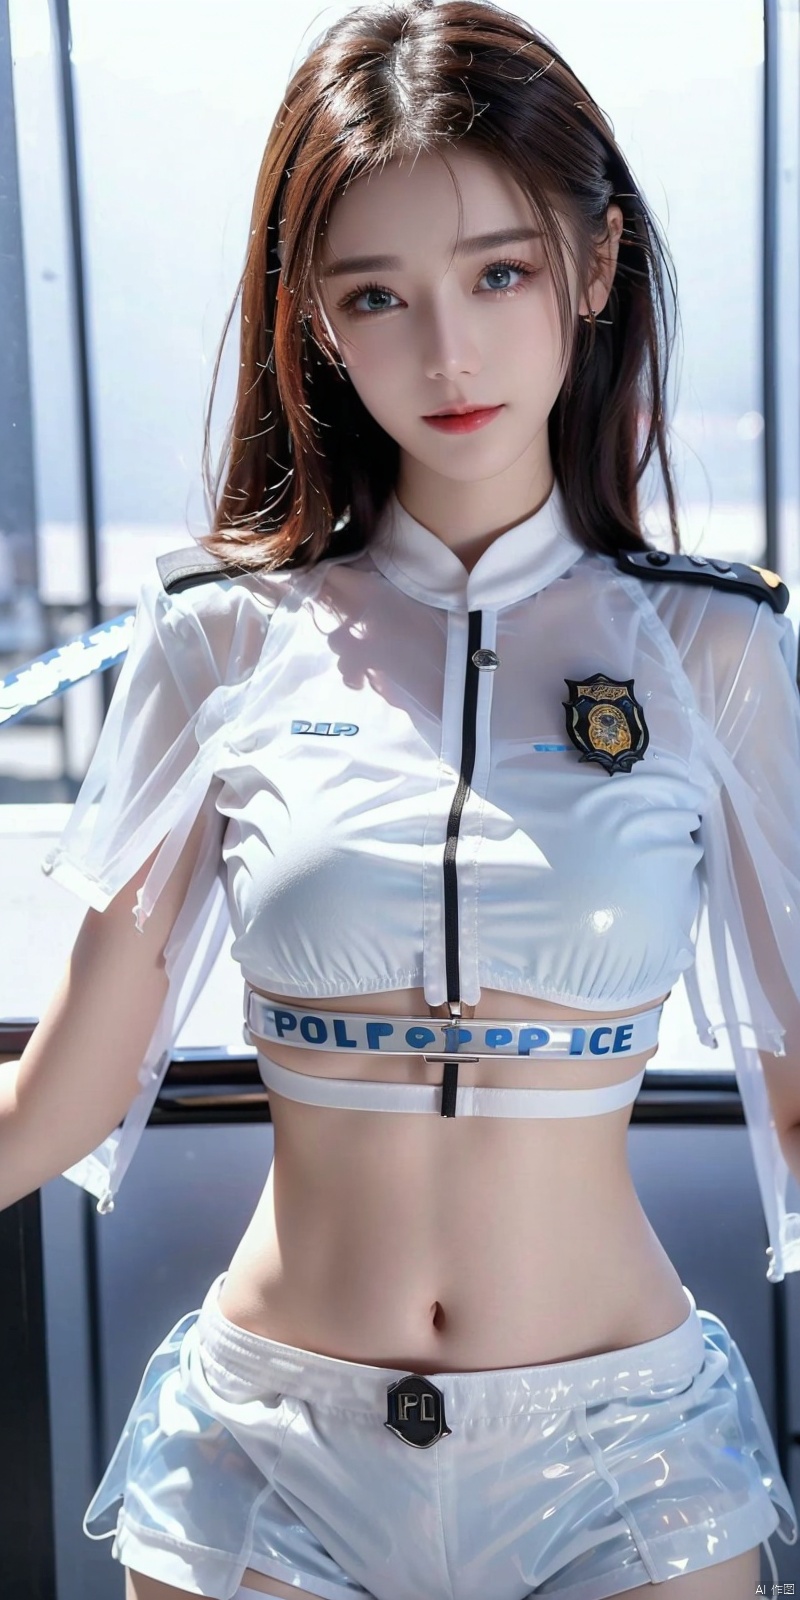  DSLR, (Good structure), ,High quality, masterpiece, 1Girl, Earstuds, blue eyes,Earstuds, blue eyes, black hair, (translucent white police uniform: 1.5), navel exposed, (translucent shorts: 1.3), thigh exposed, (supermodel pose),smile,(solo),（Different postures）,Pink hair,(Perfect hand lines),, 1 girl, ,, dililengba